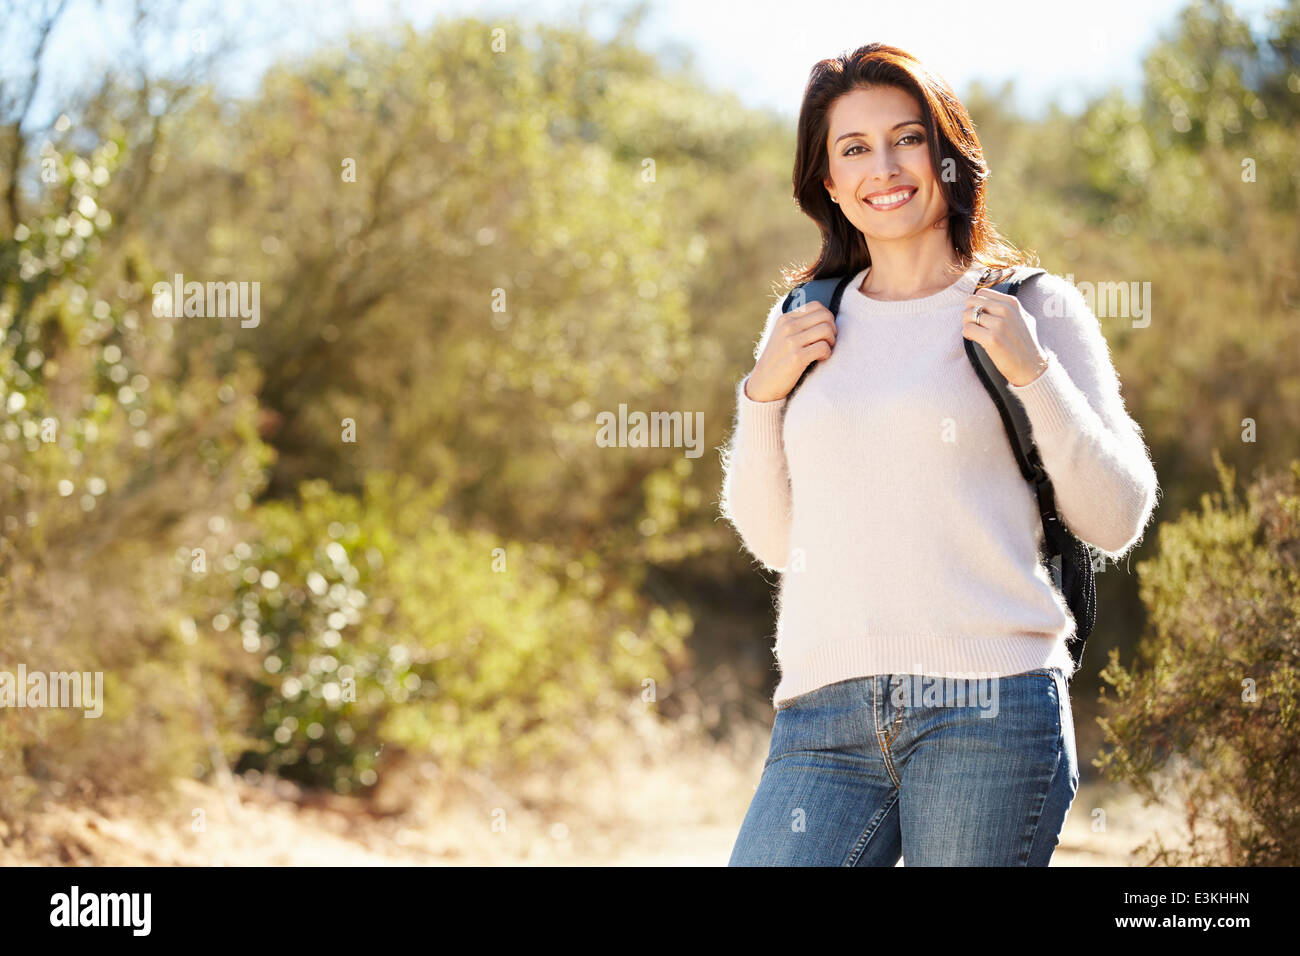 Portrait Of Woman Hiking In Countryside Wearing Backpack Stock Photo